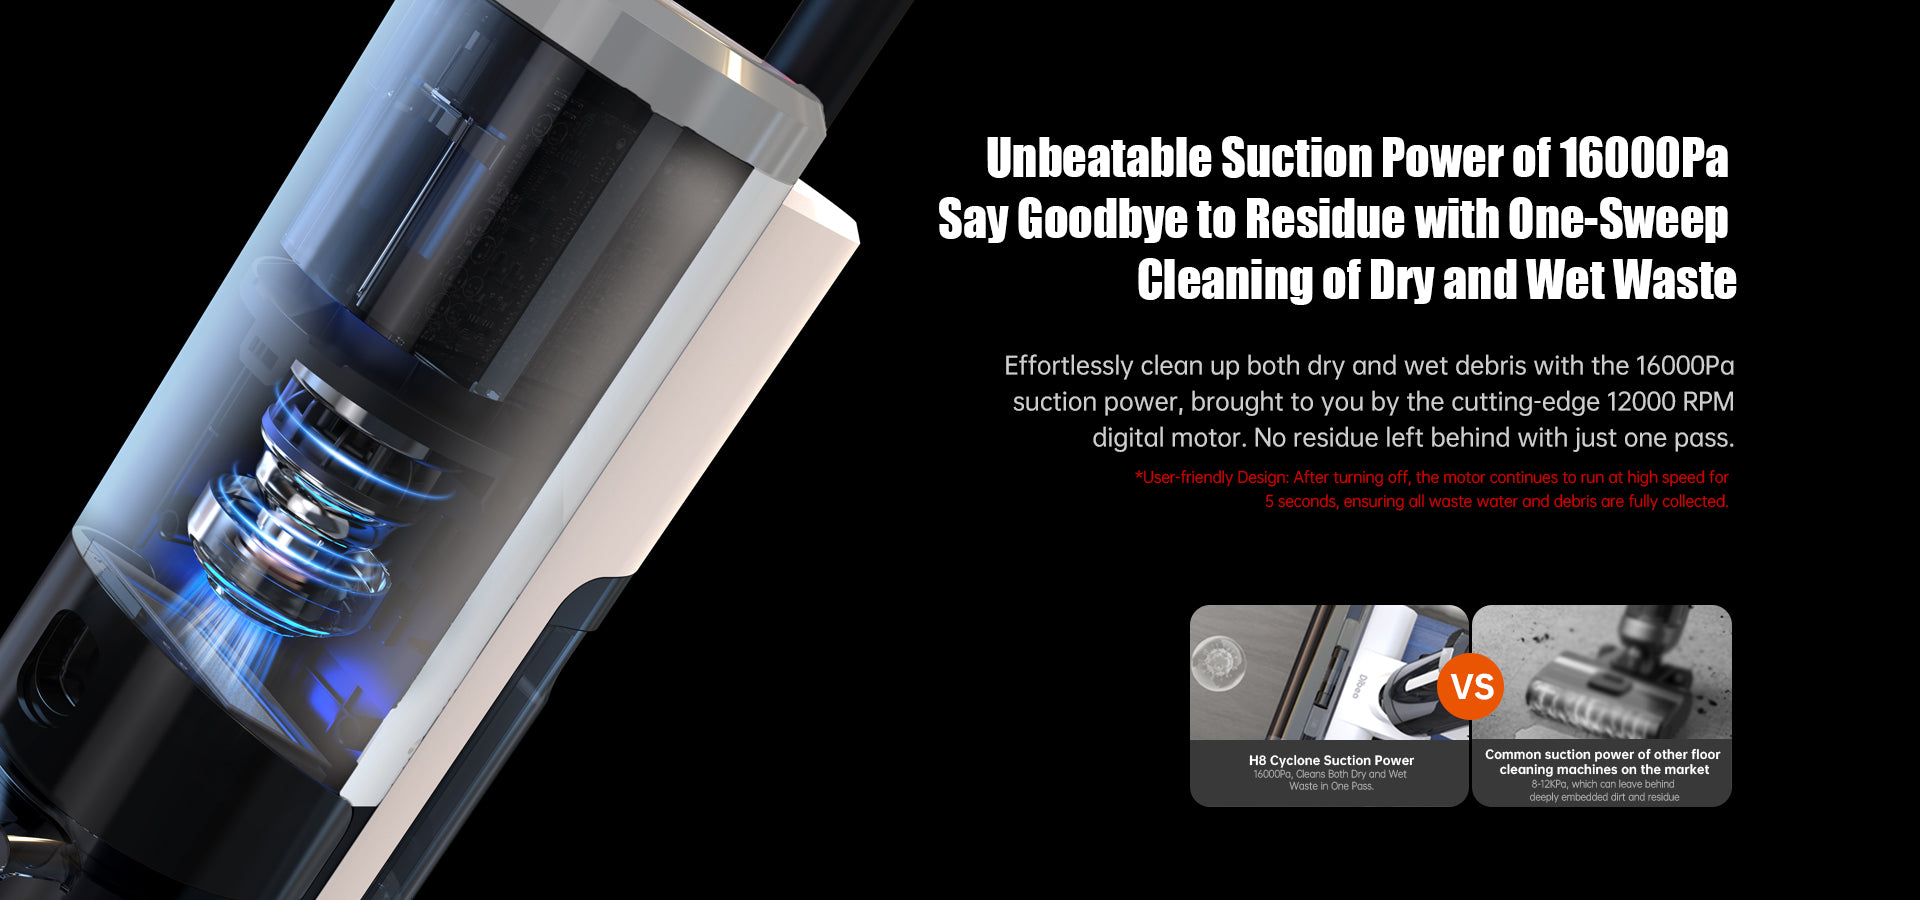 Unbeatable_Suction_Power_of_16000Pa_Say_Goodbye_to_Residue_with_0ne-Sweep_Cleaning_of_Dry_and_Wet_Waste